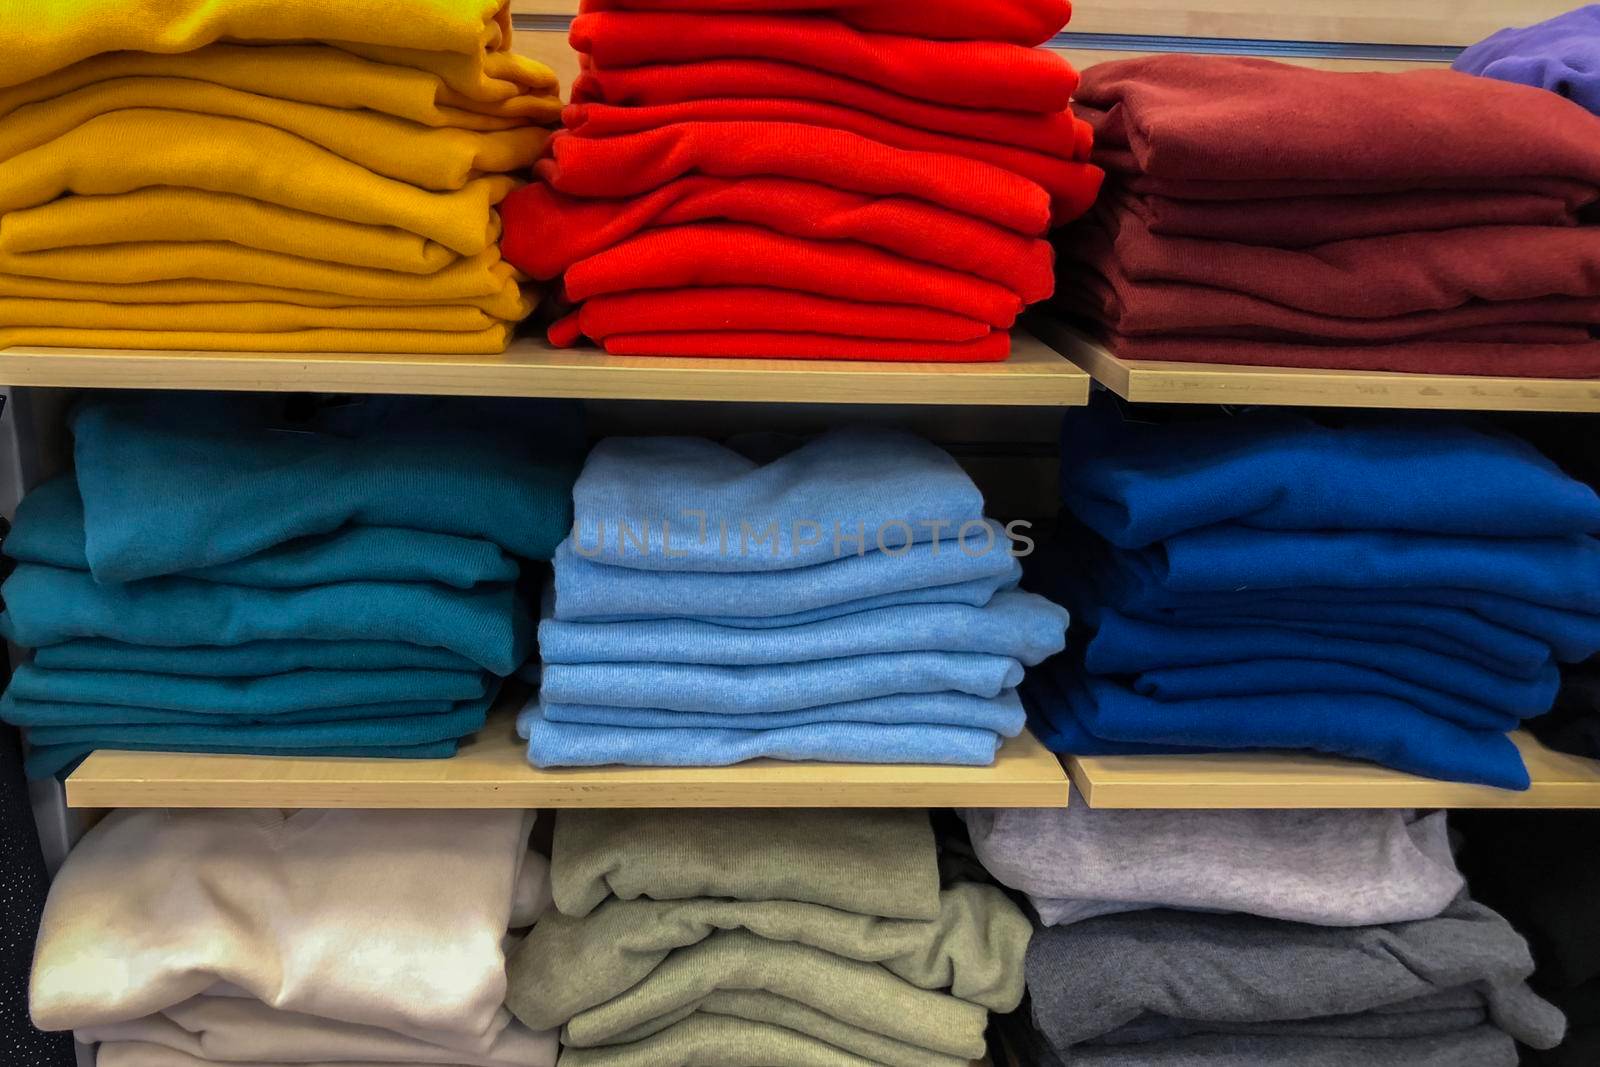 Rows of folded colorful clothes in a store